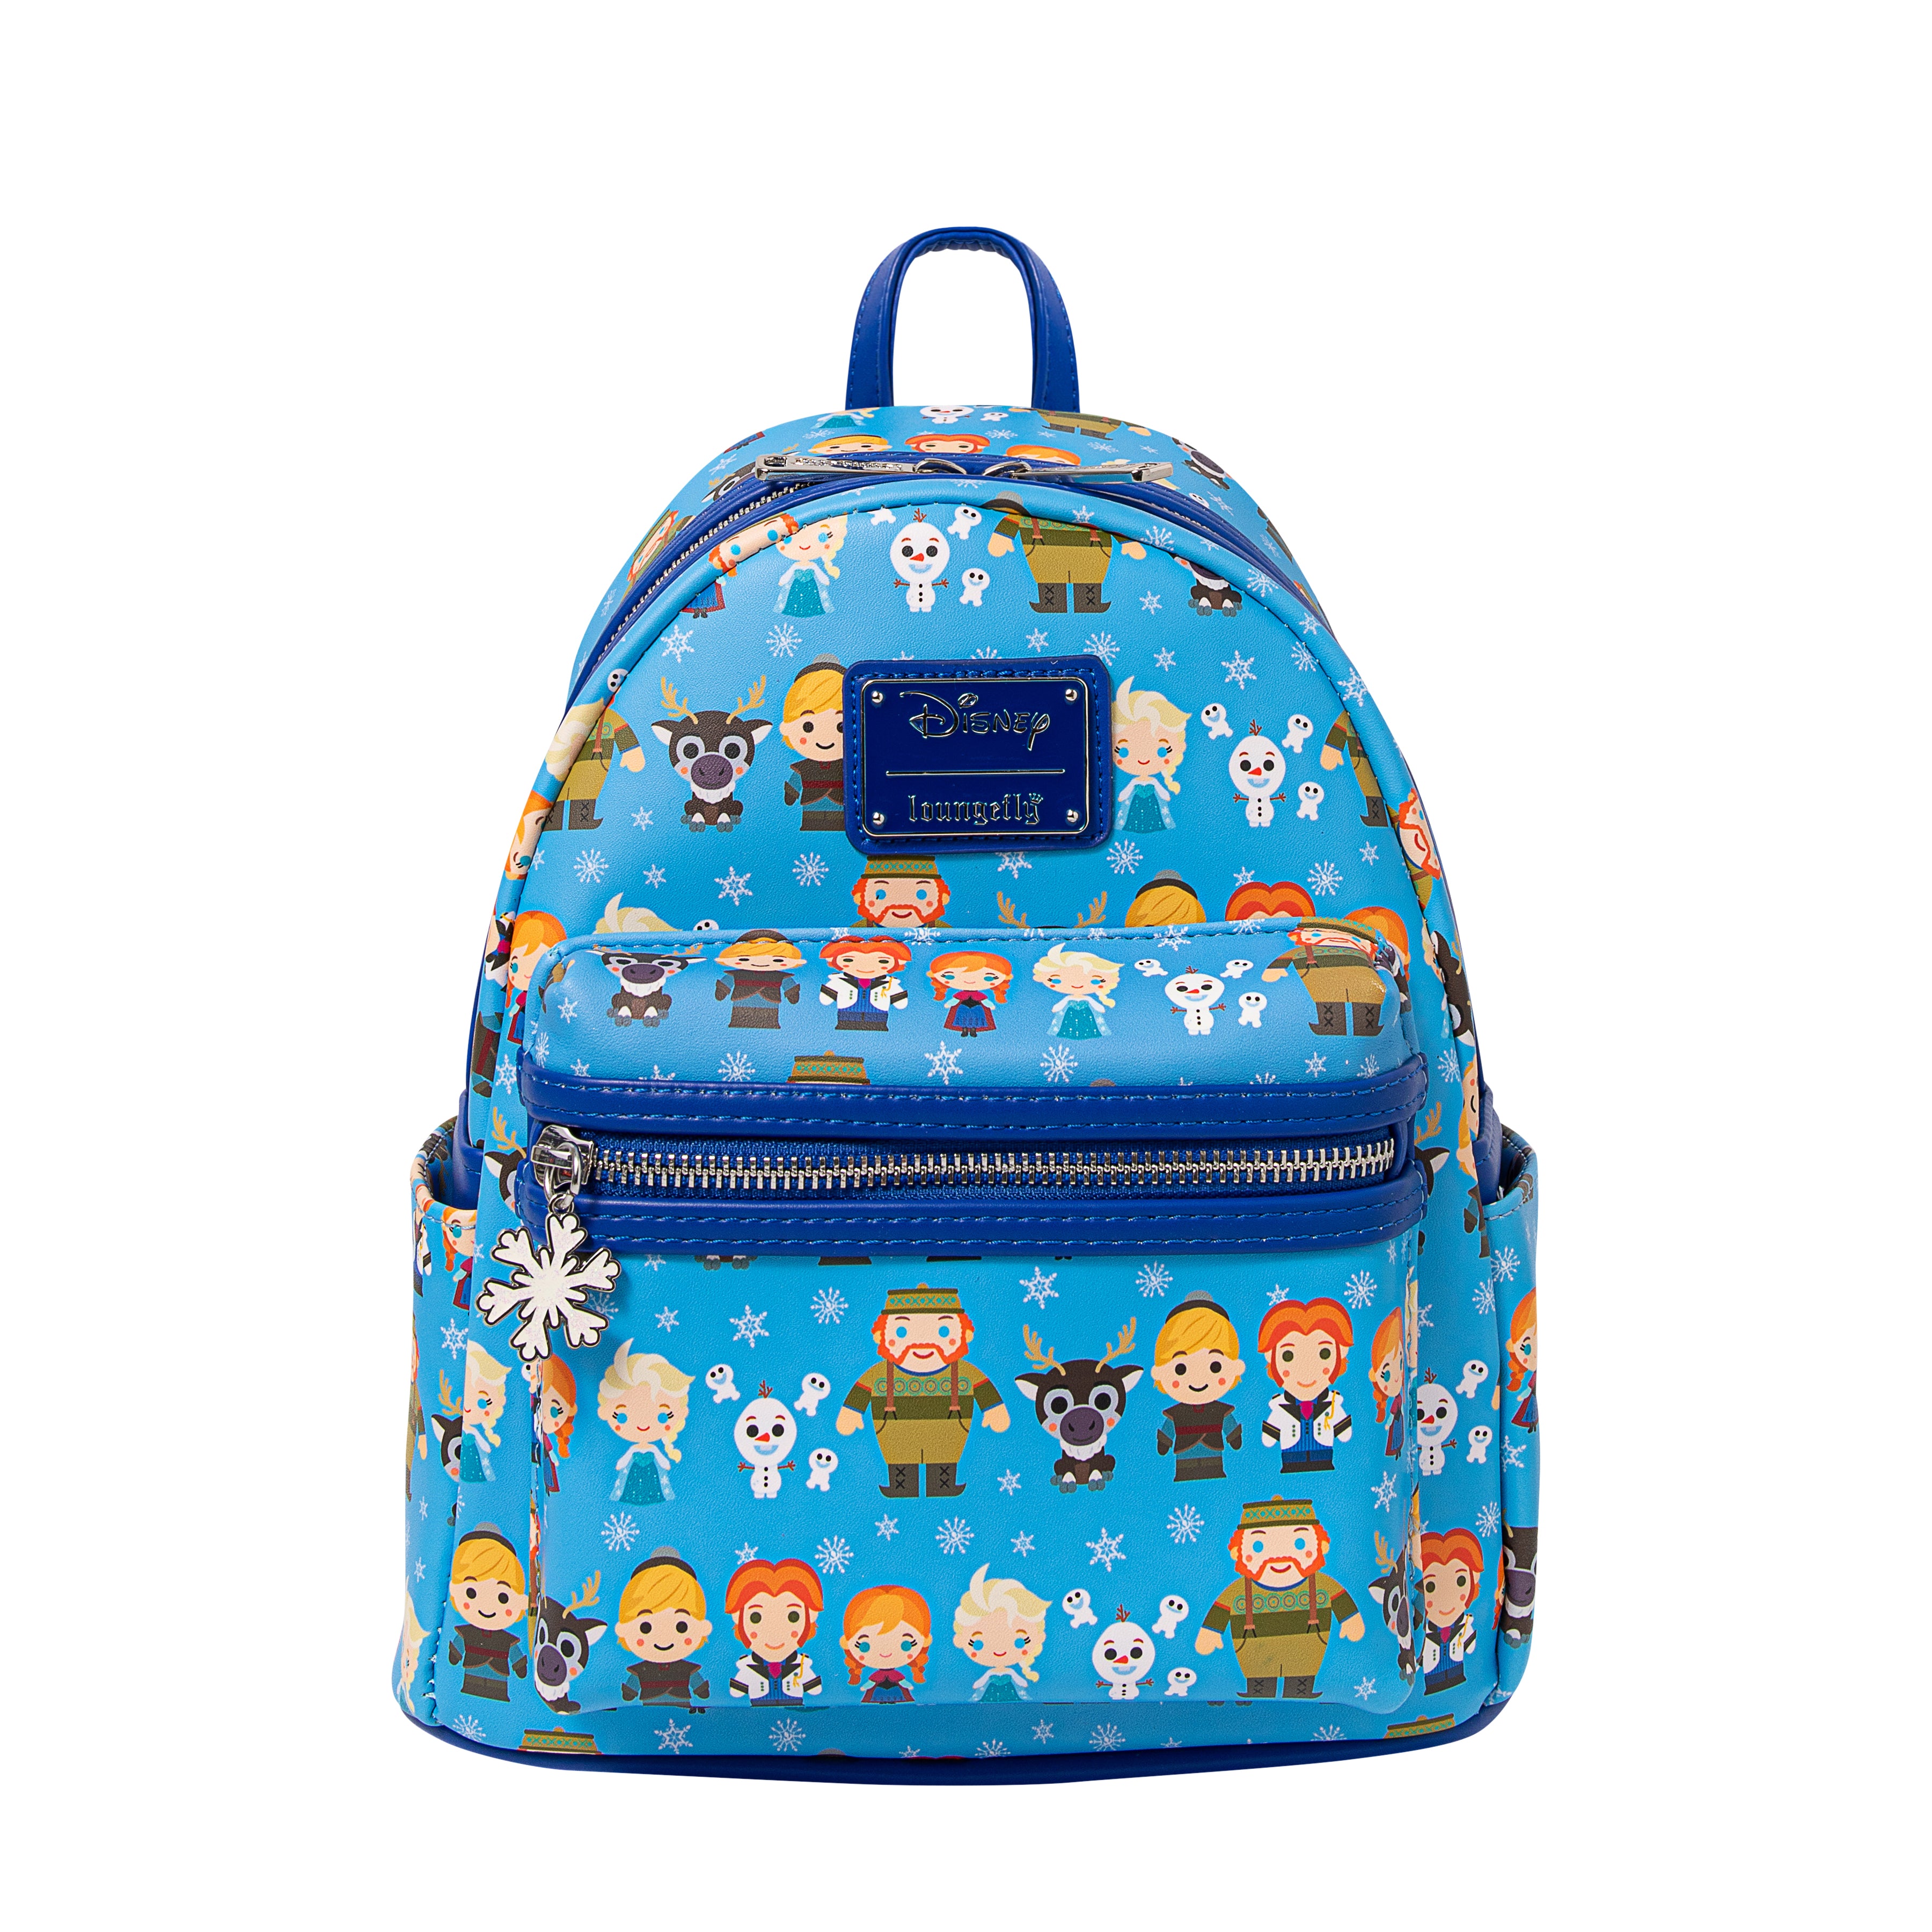 Loungefly Disney Frozen Olaf Mini Backpack | Hot Topic